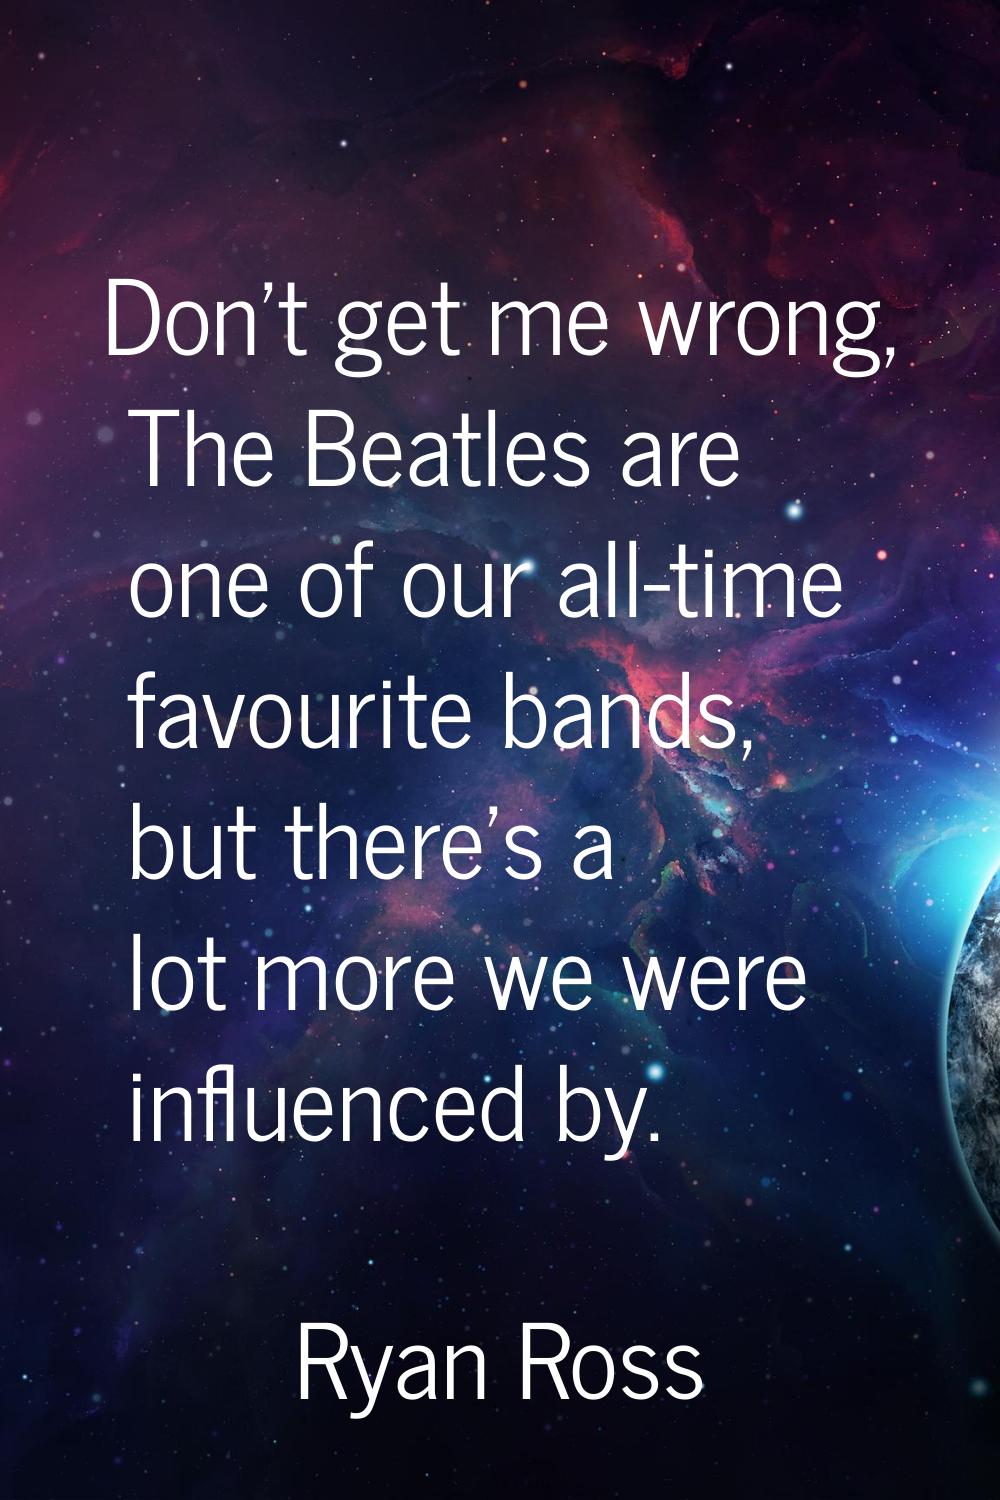 Don't get me wrong, The Beatles are one of our all-time favourite bands, but there's a lot more we 